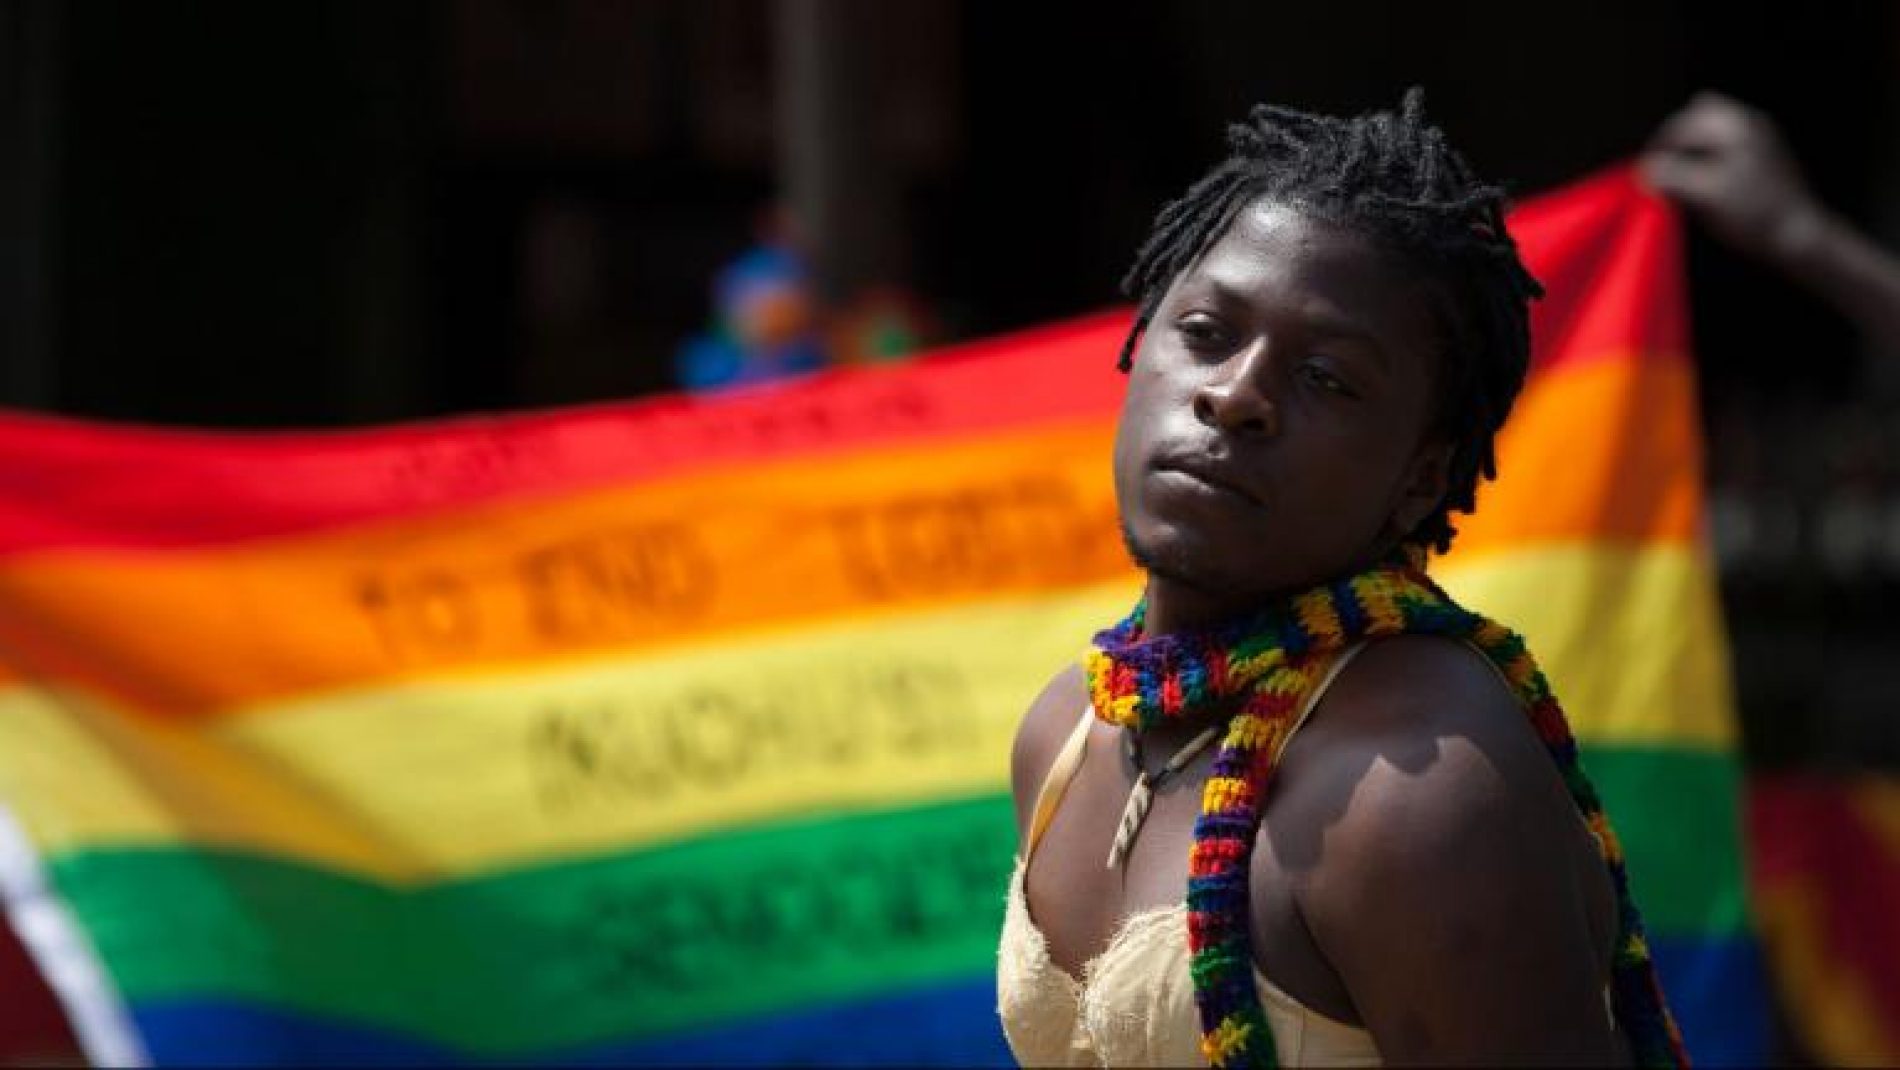 What Are Your Thoughts On Being Queer In Nigeria?